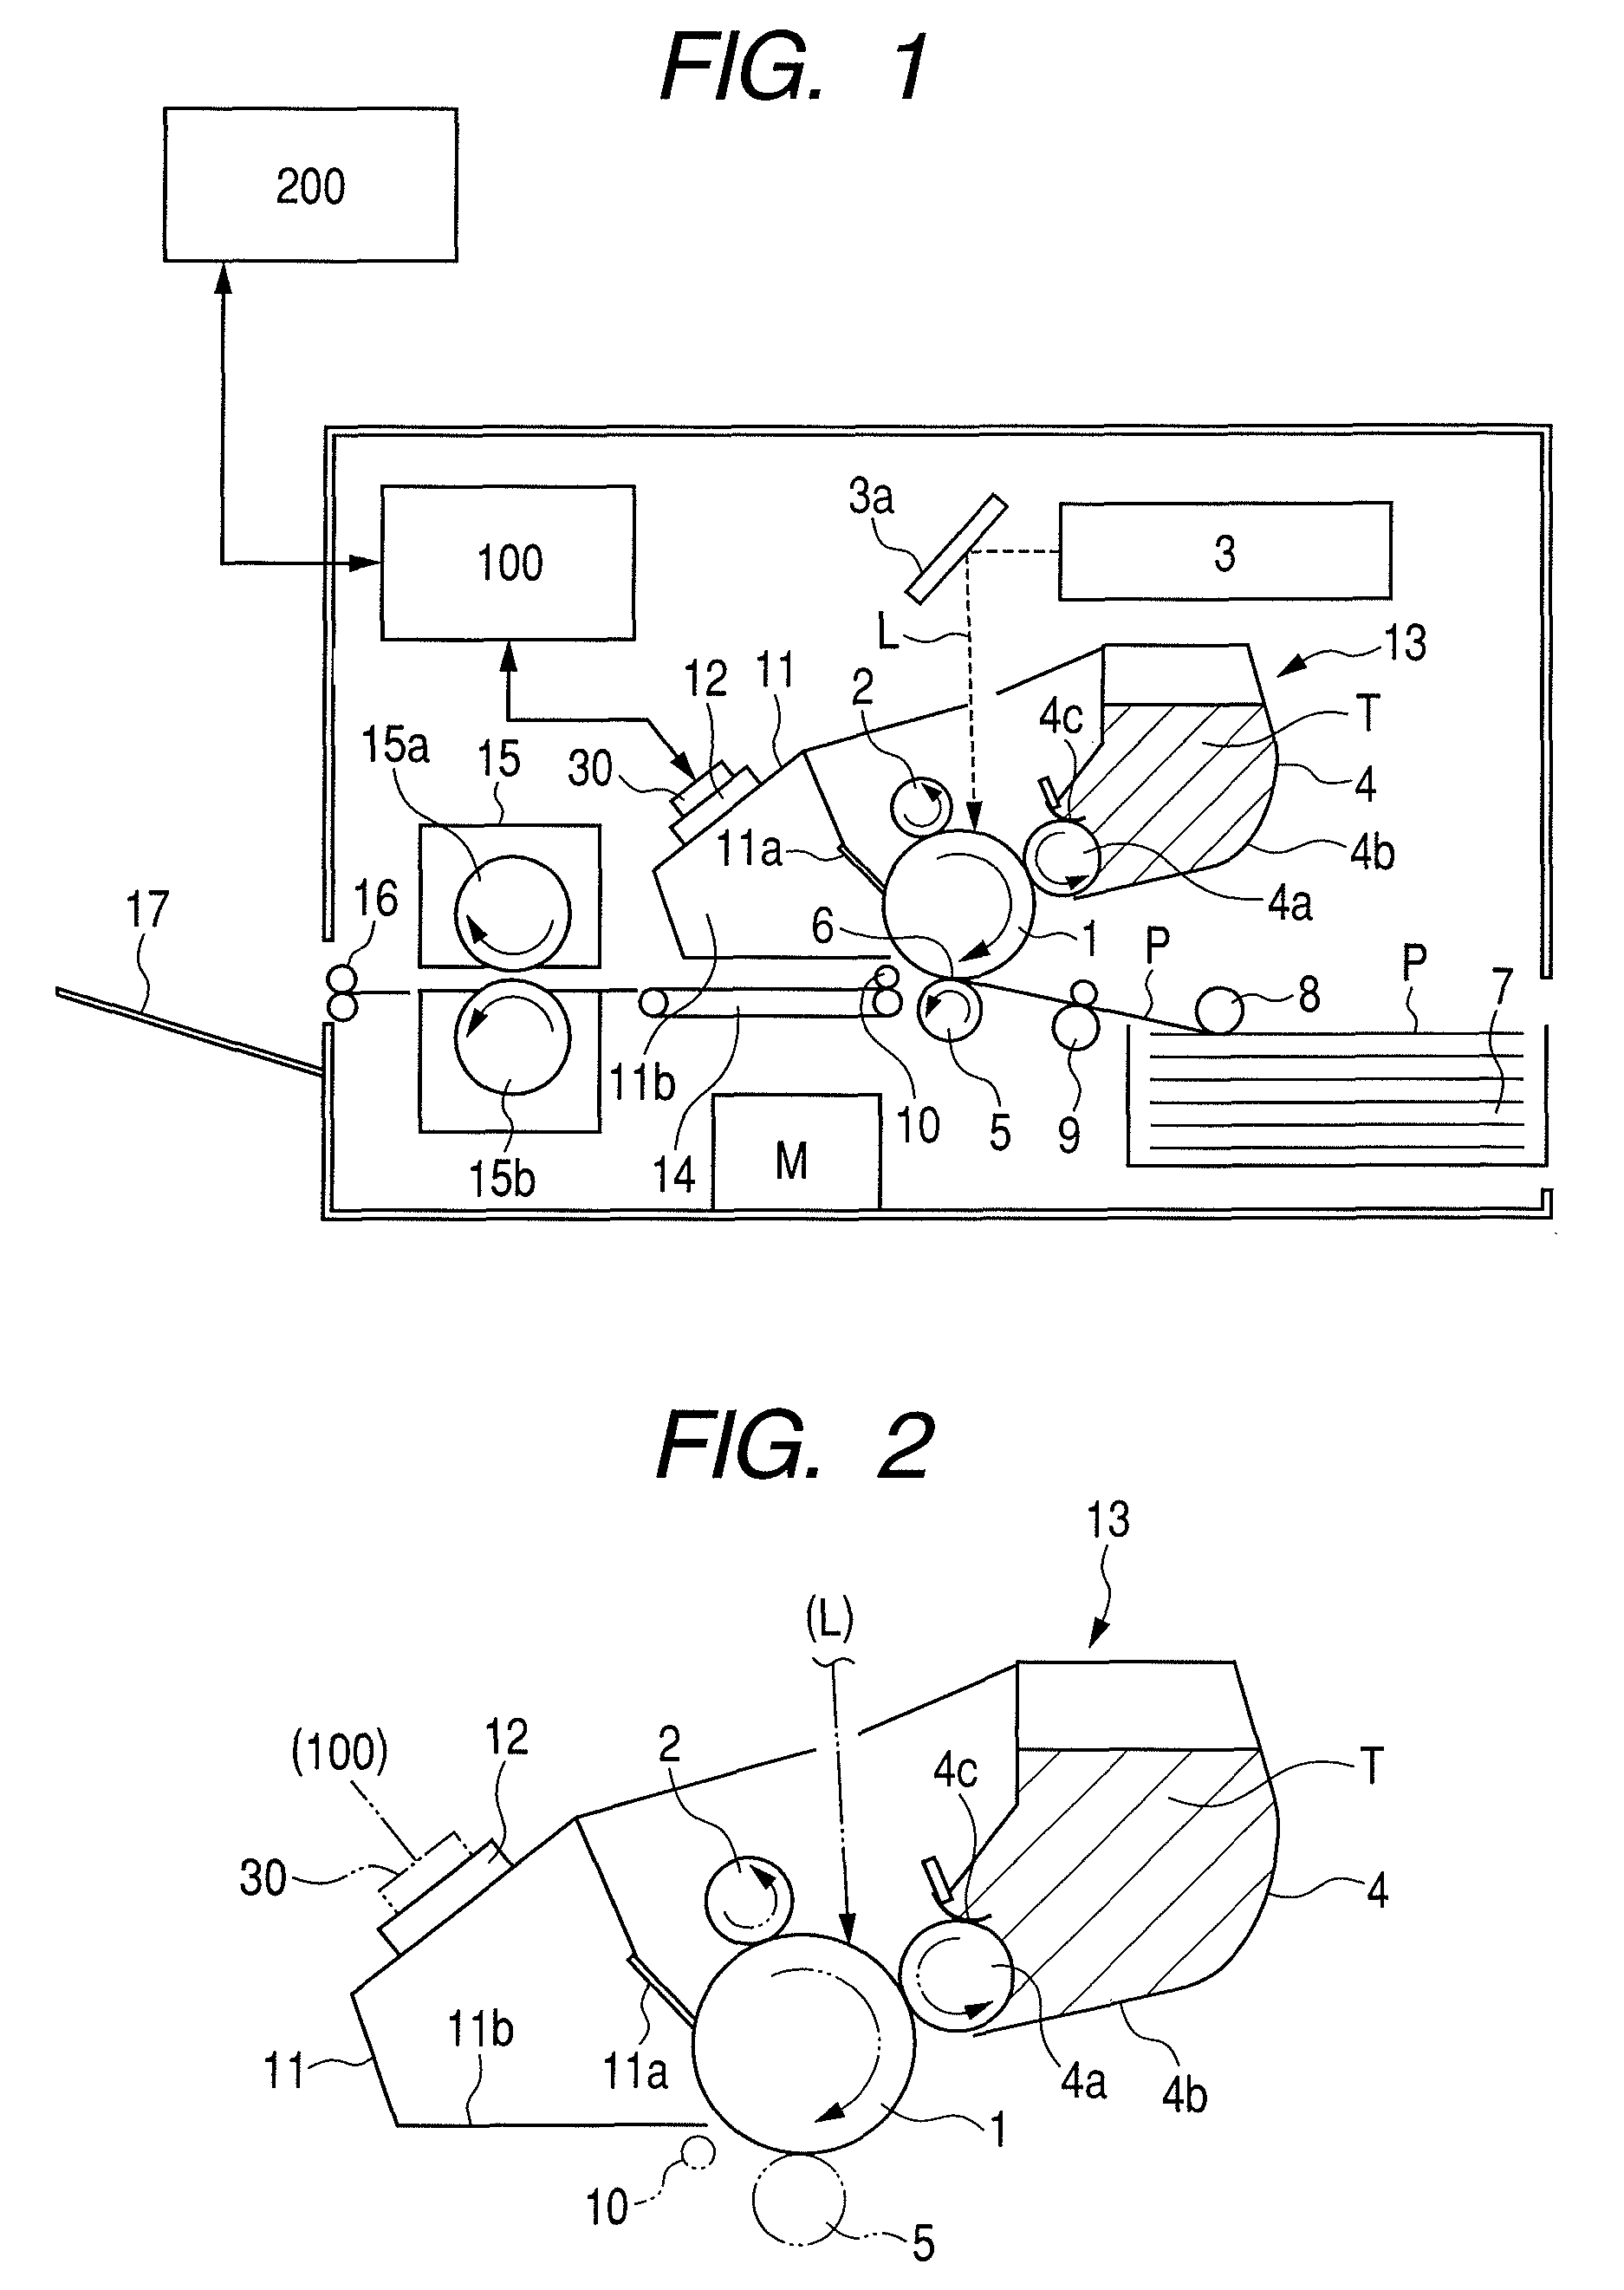 Image forming apparatus with a pre-exposure light control feature